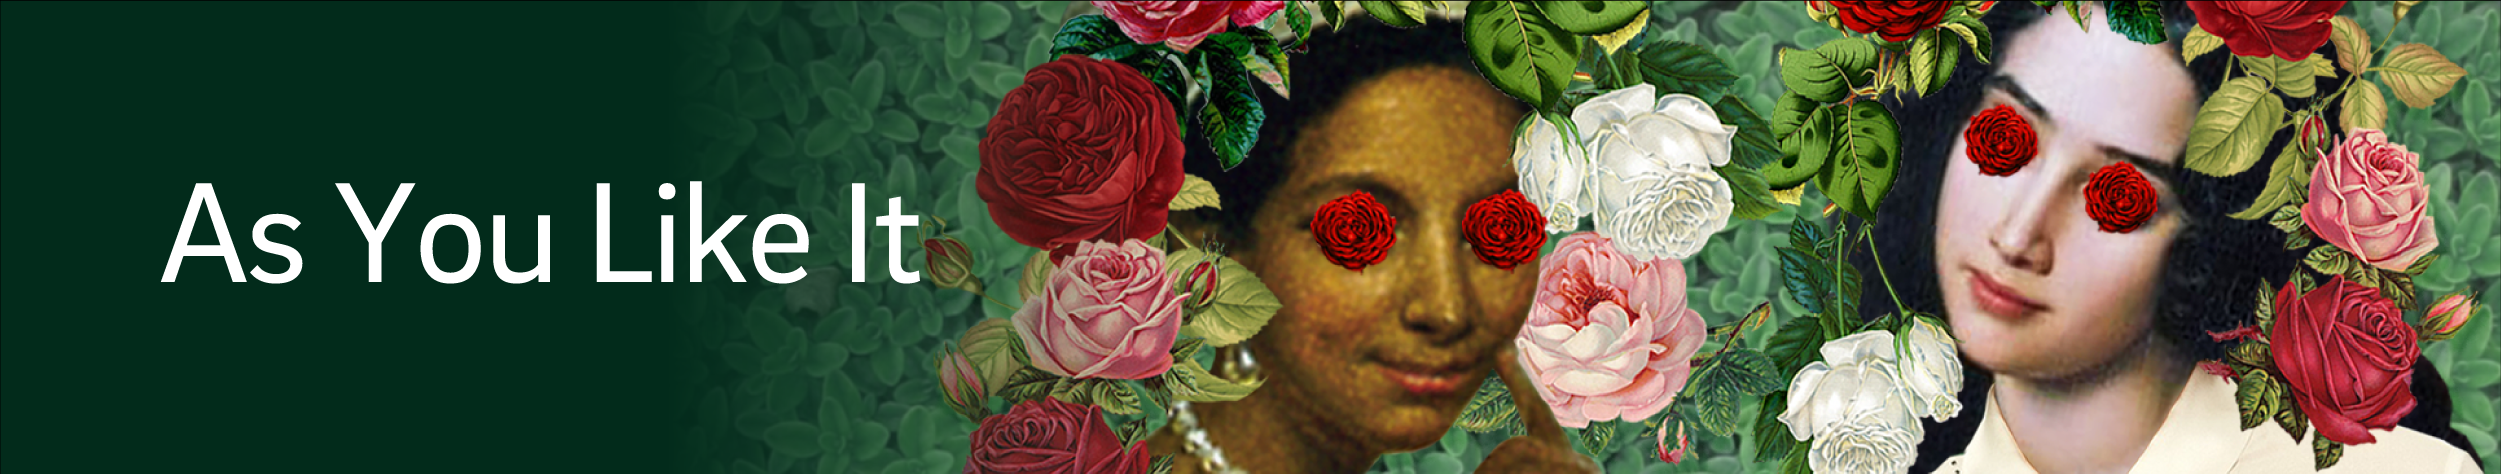 a collage featuring two girls and roses